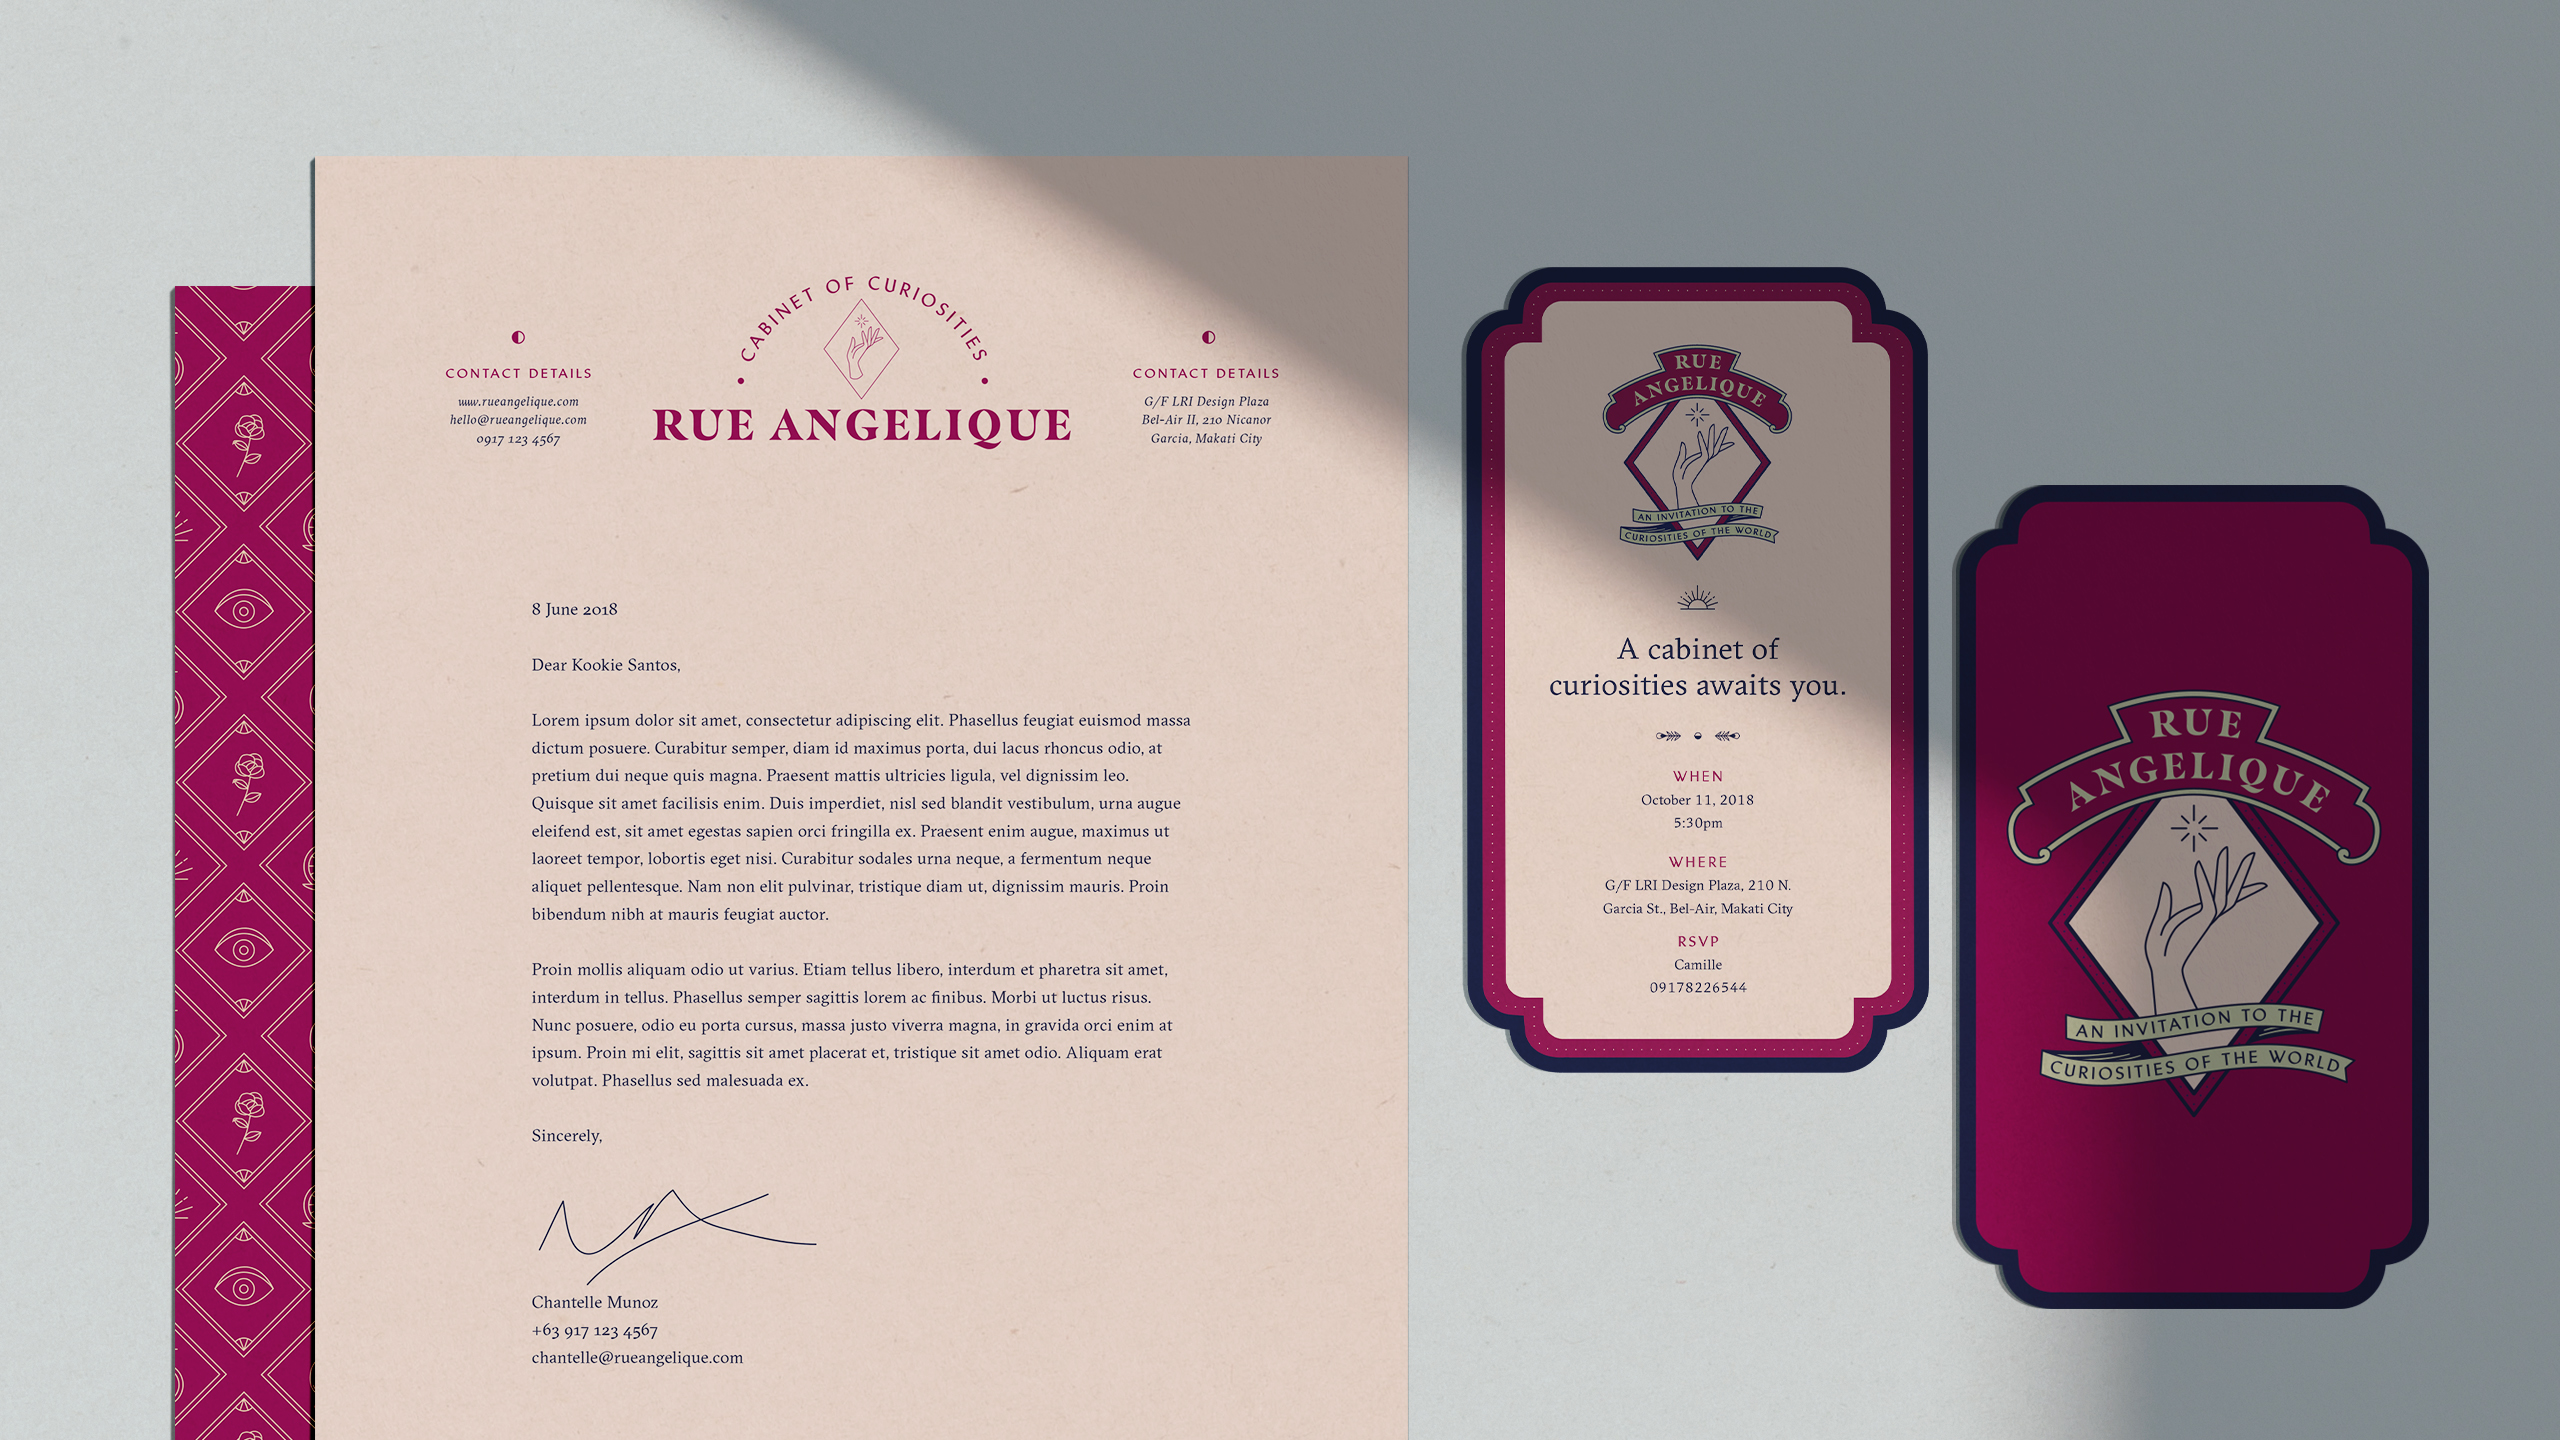 Business cards and branded stationary for antiques store Rue Angelique